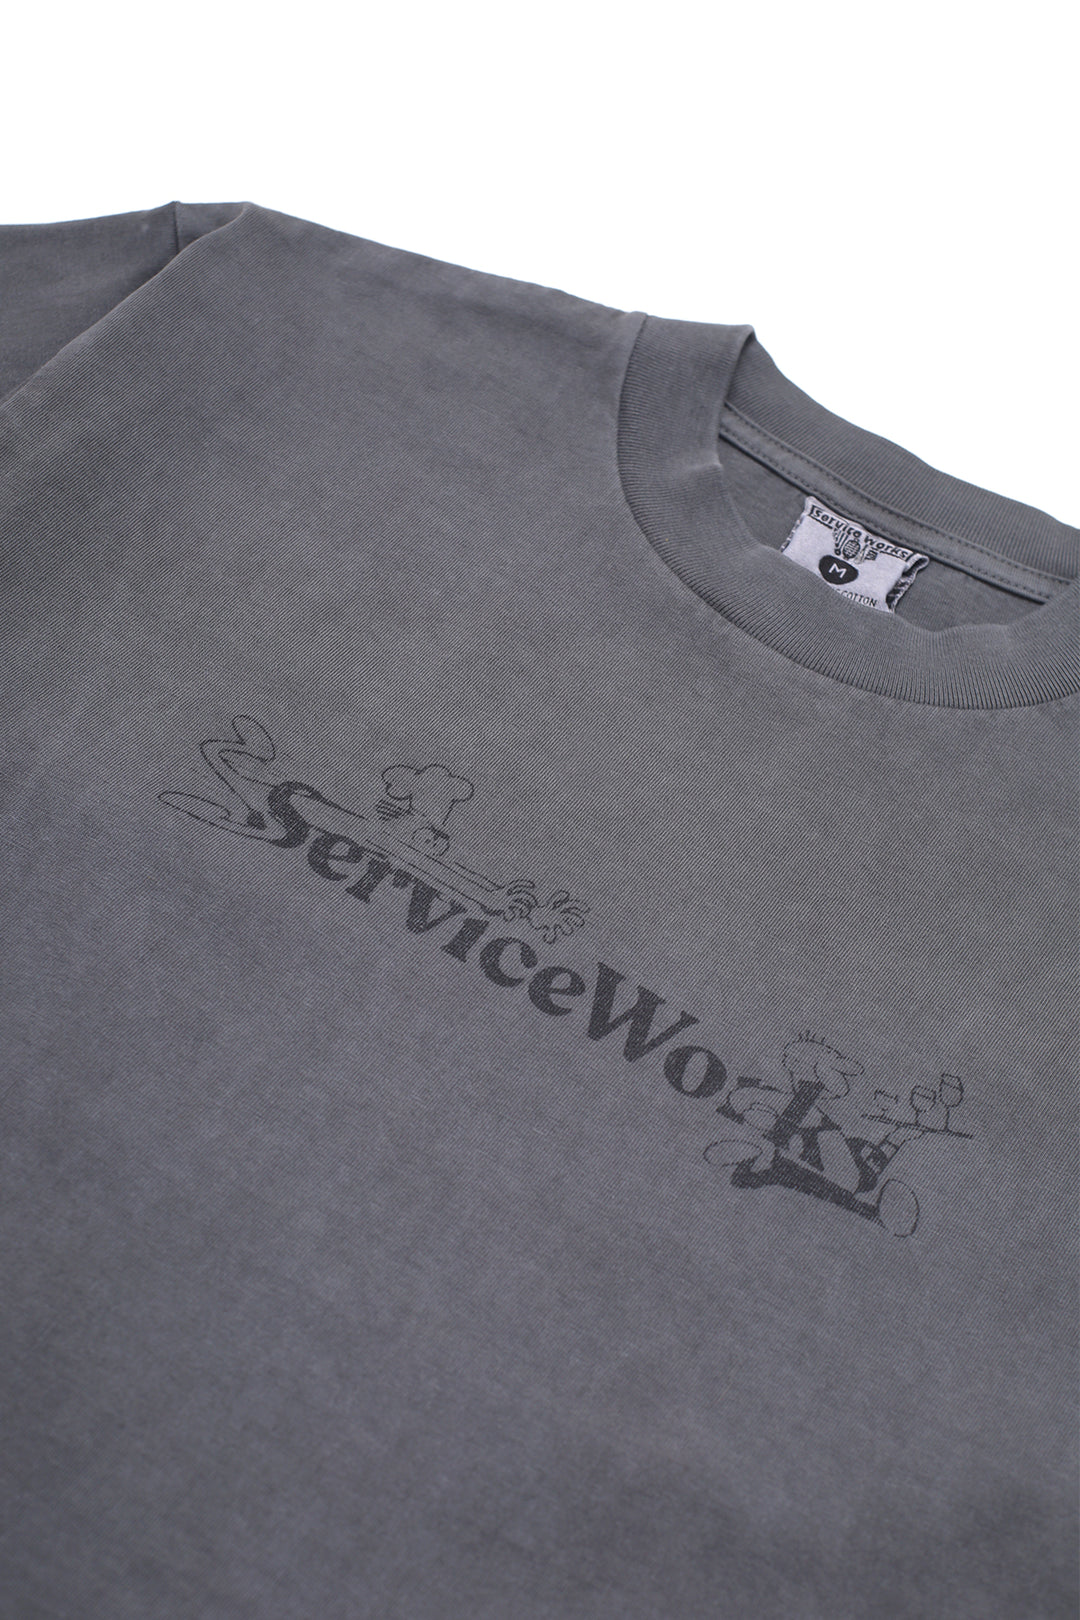 Service Works - Chase Tee - Charcoal